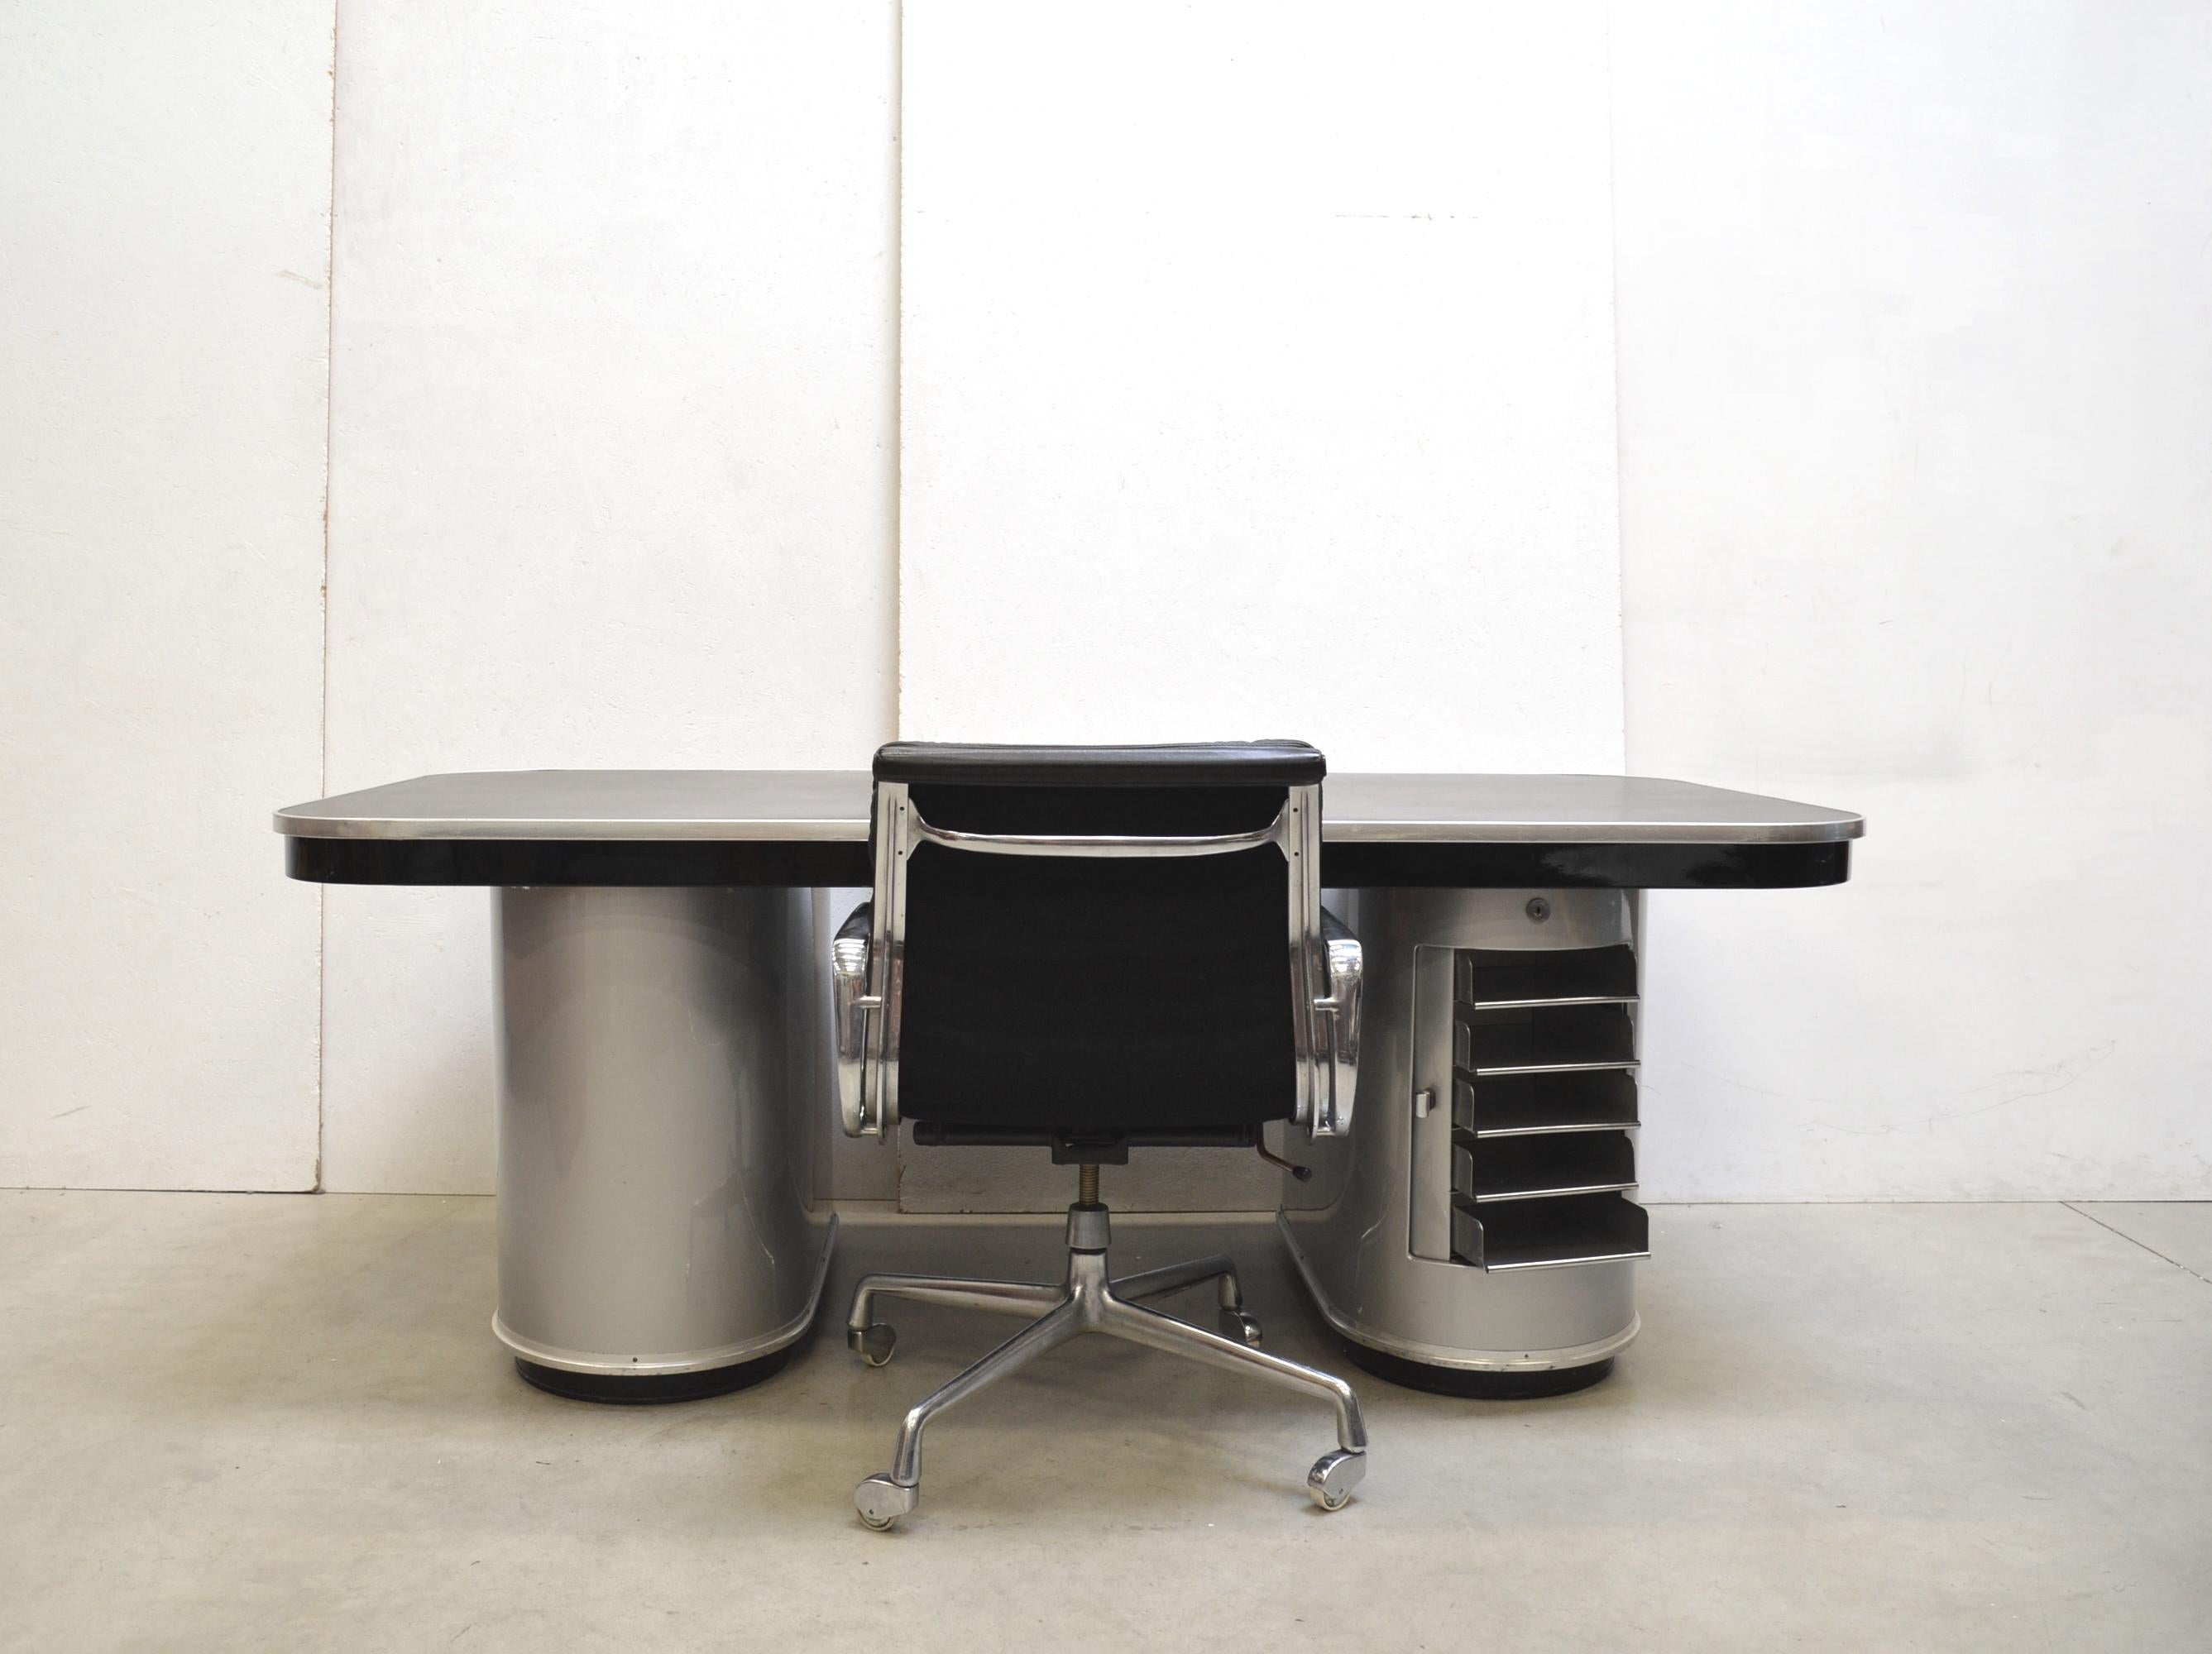 This rare and impressive Berlin executive desk from the Rundform series was designed in the 40s and produced by Mauser Werke in the late 40s. The impressive piece features 2 elements one of it with a circular drawer mechanism. 

The desk was 20